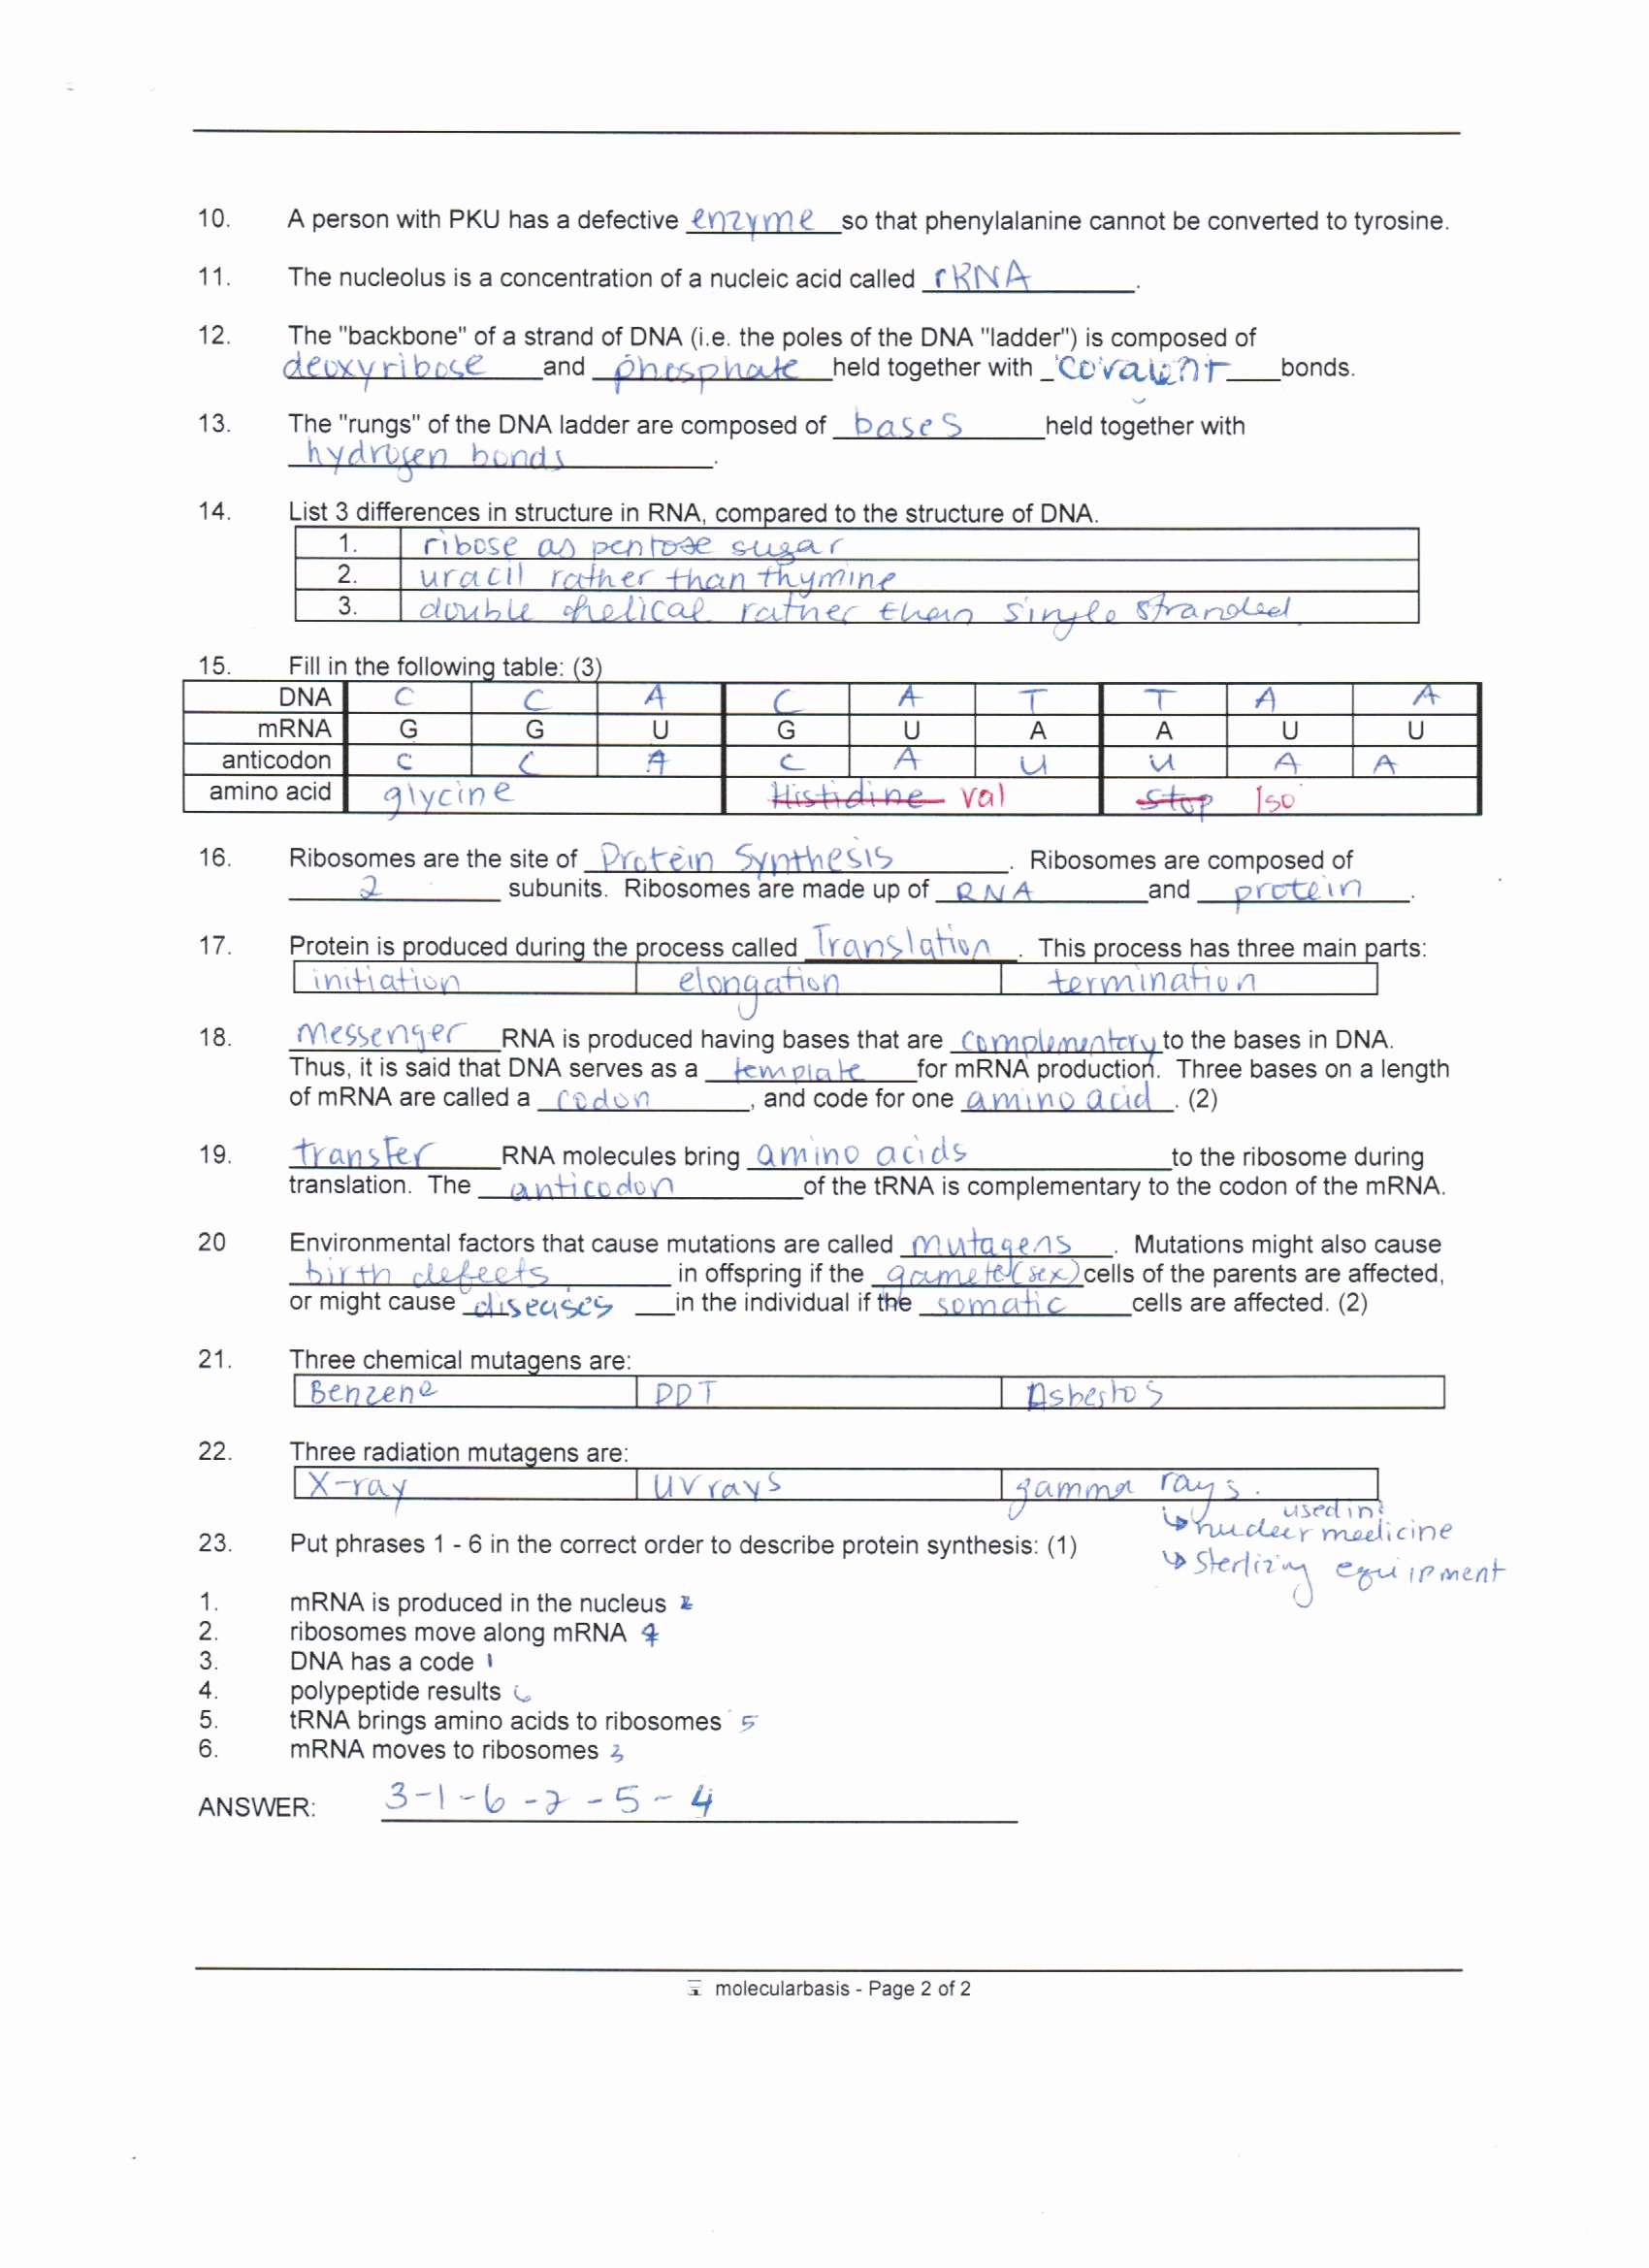 Protein Synthesis Review Worksheet Answers Unique Answer Key Dna Protein Synthesis and Mutations Review